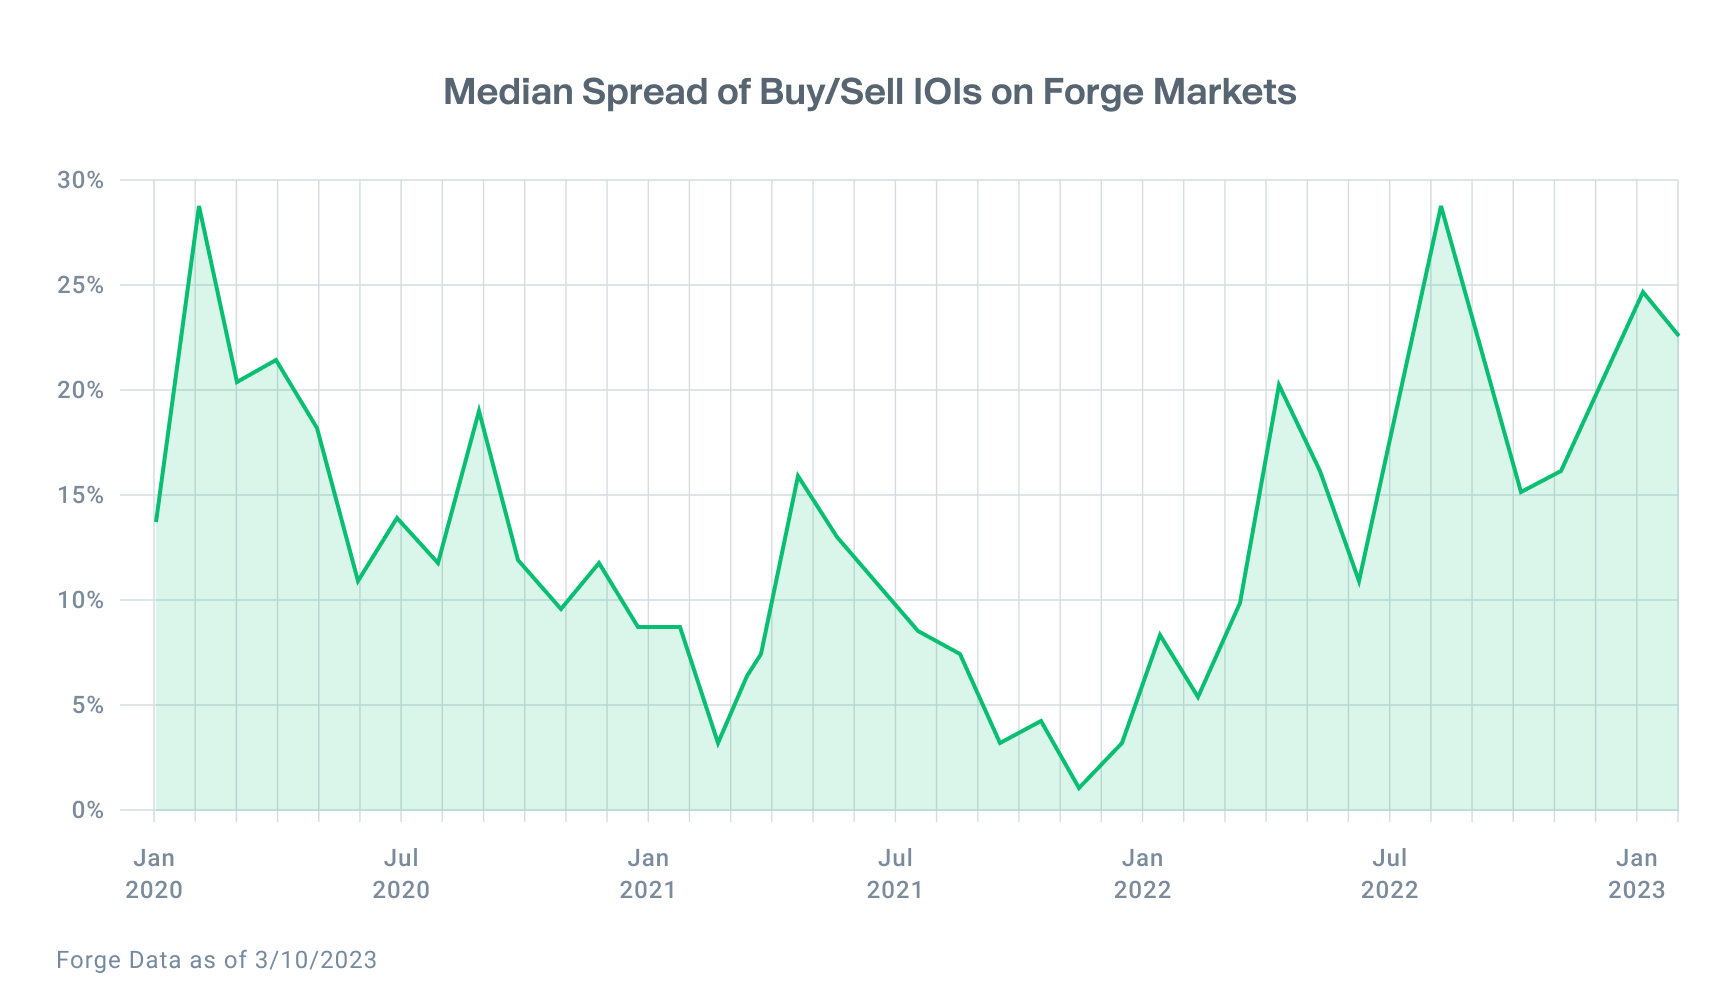 Chart shows the median spread of new Buy and Sell IOIs on Forge Markets